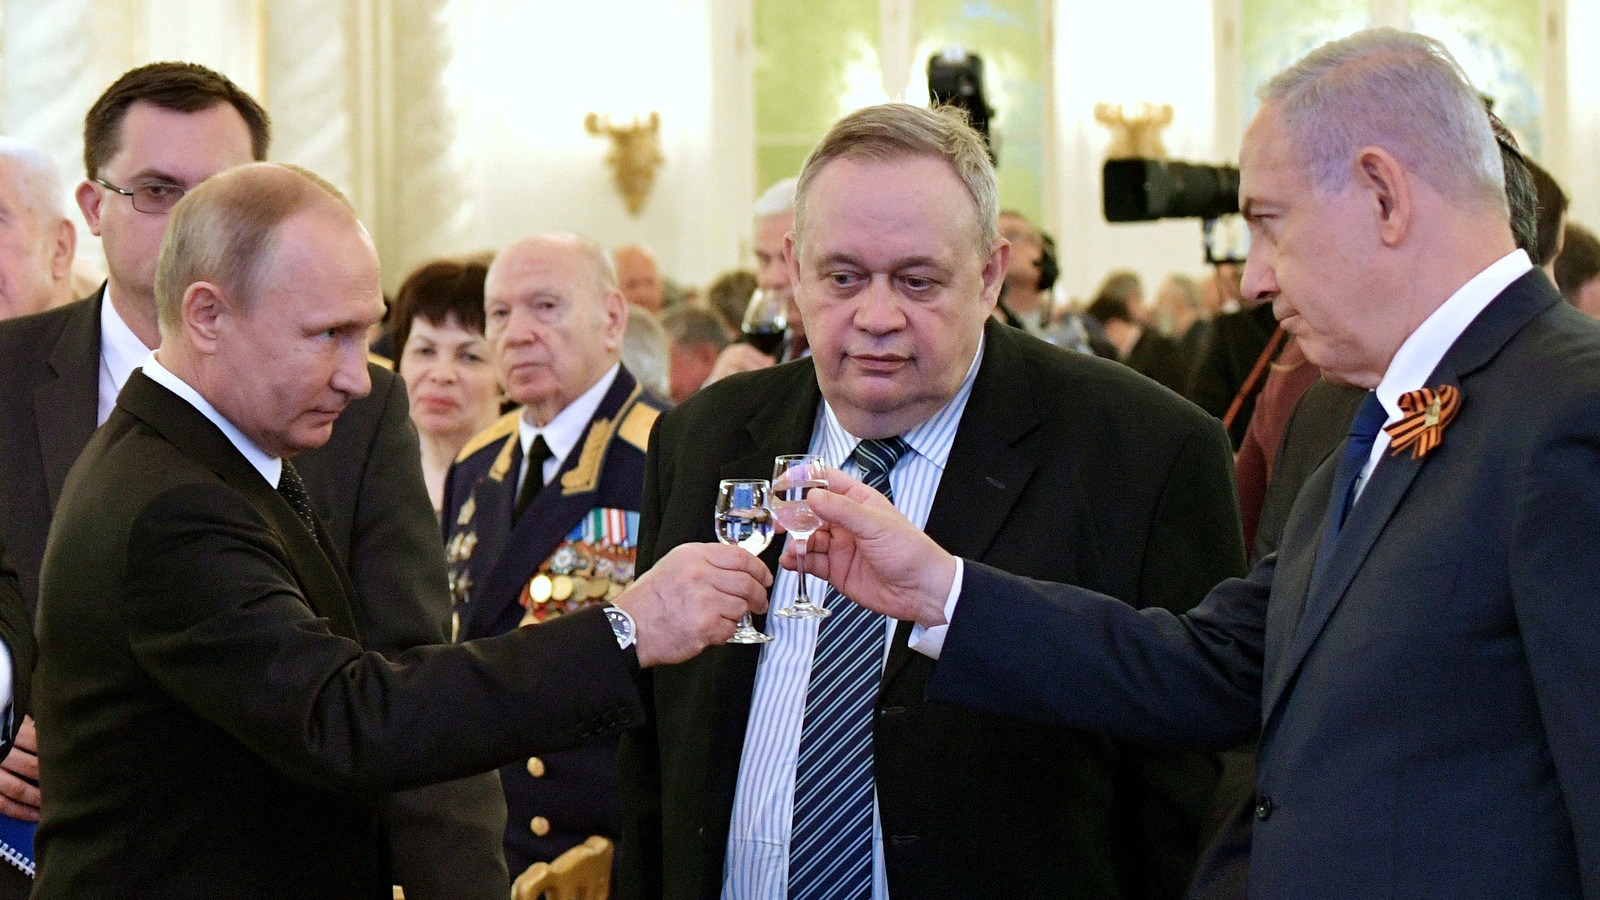 Russian President Vladimir Putin, left, and Israeli Prime Minister Benjamin Netanyahu, right, toast during a reception after the Victory Parade in Moscow, Russia, May 9, 2018.(Alexei Nikolsky, Sputnik via AP)